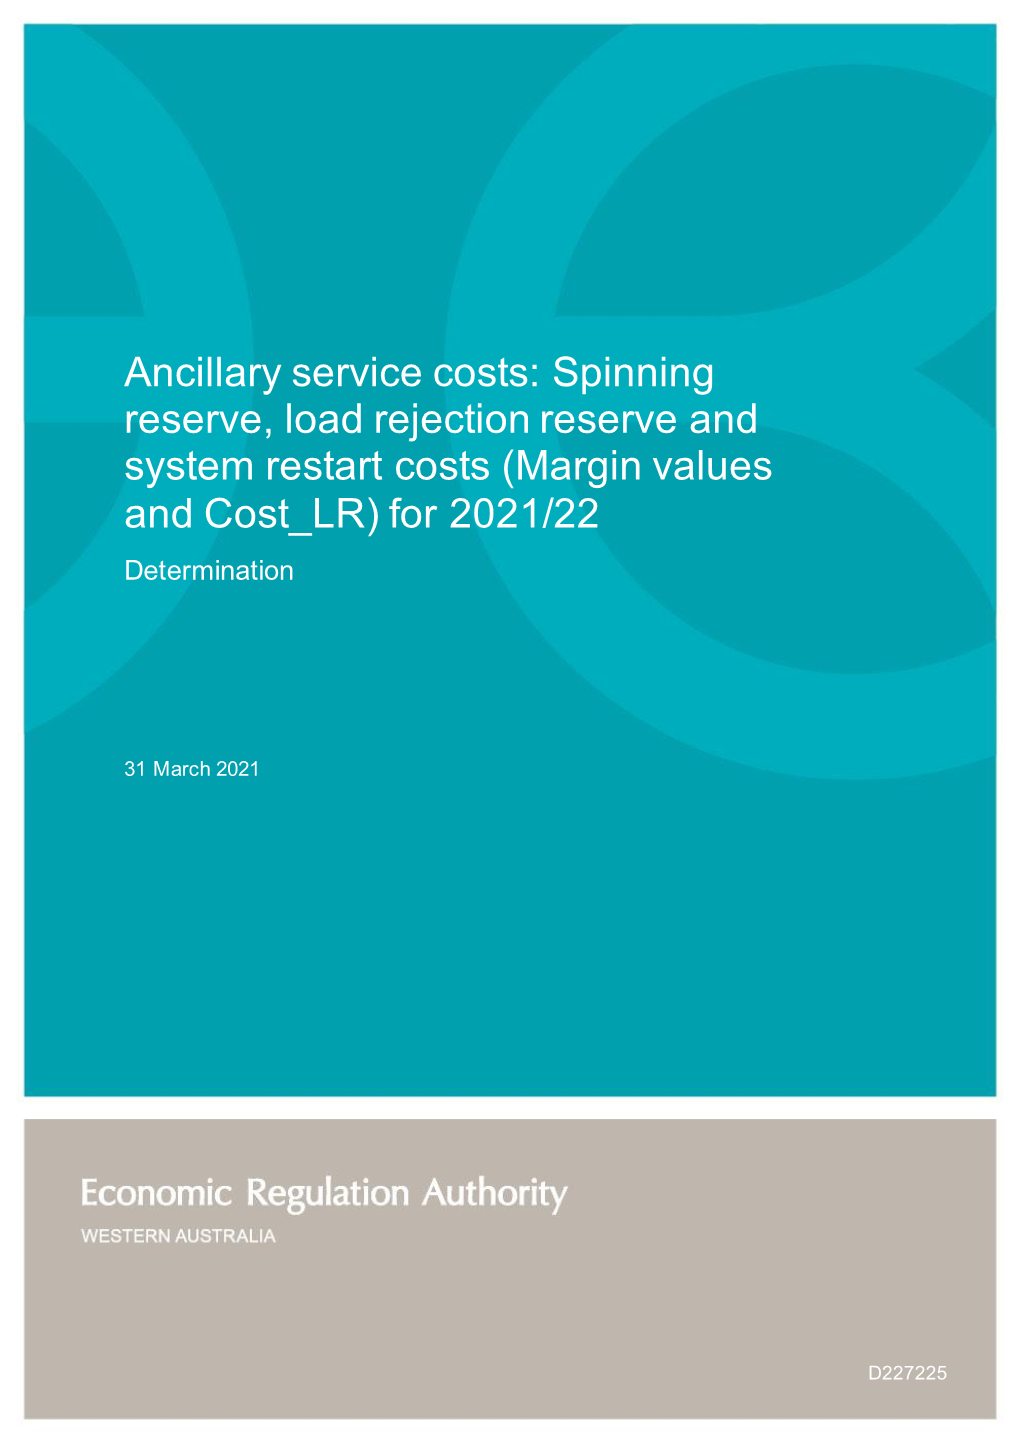 Ancillary Service Costs: Spinning Reserve, Load Rejection Reserve and System Restart Costs (Margin Values and Cost LR) for 2021/22 Determination